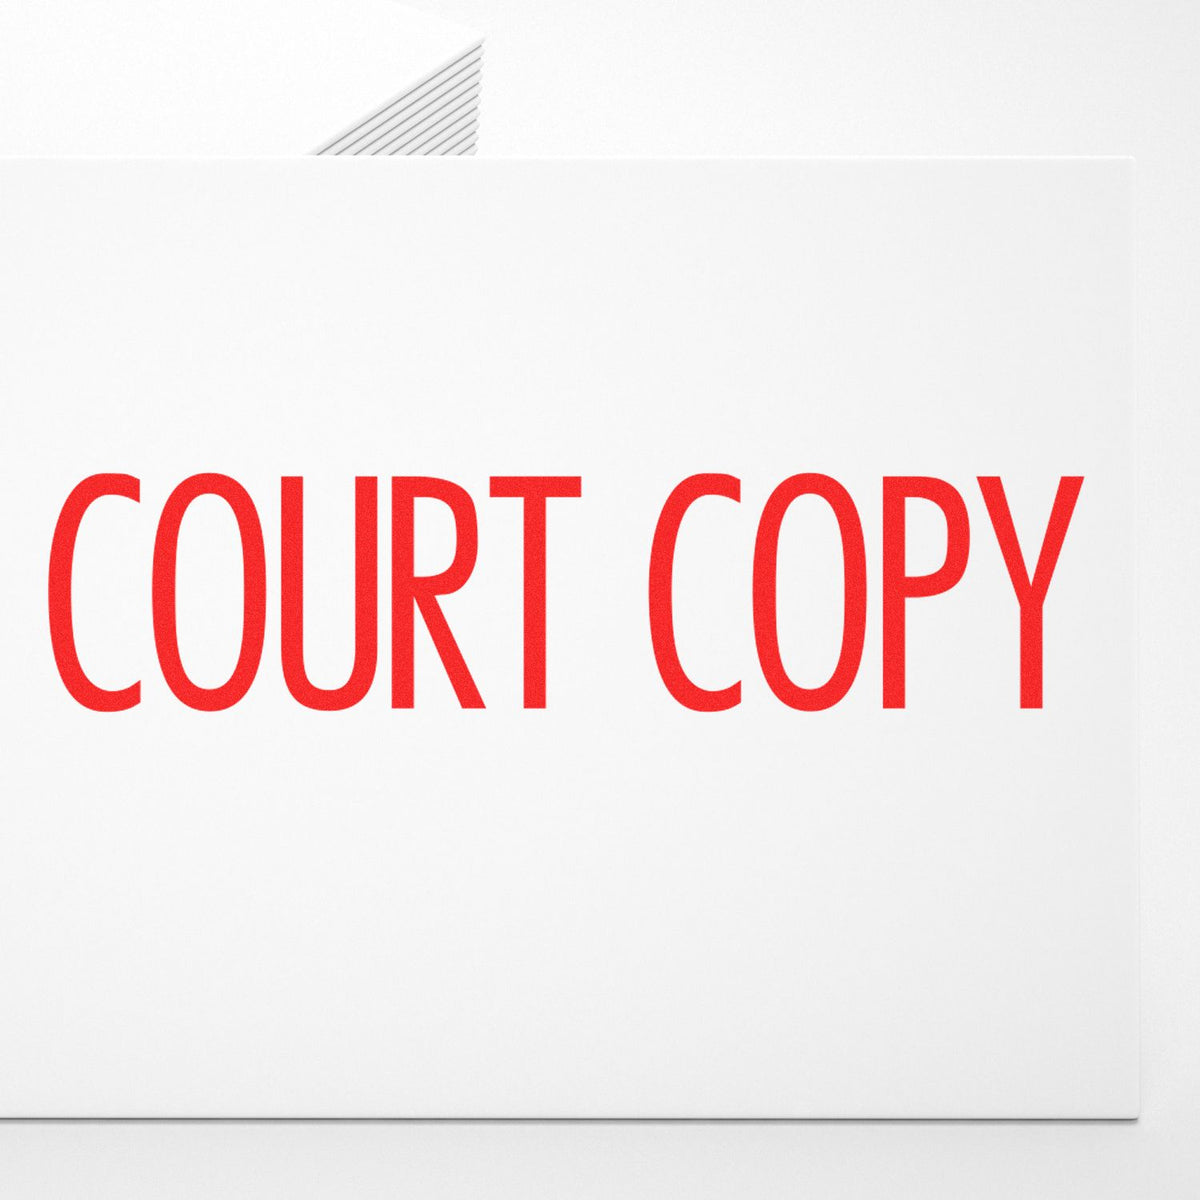 Large Narrow Font Court Copy Rubber Stamp In Use Photo